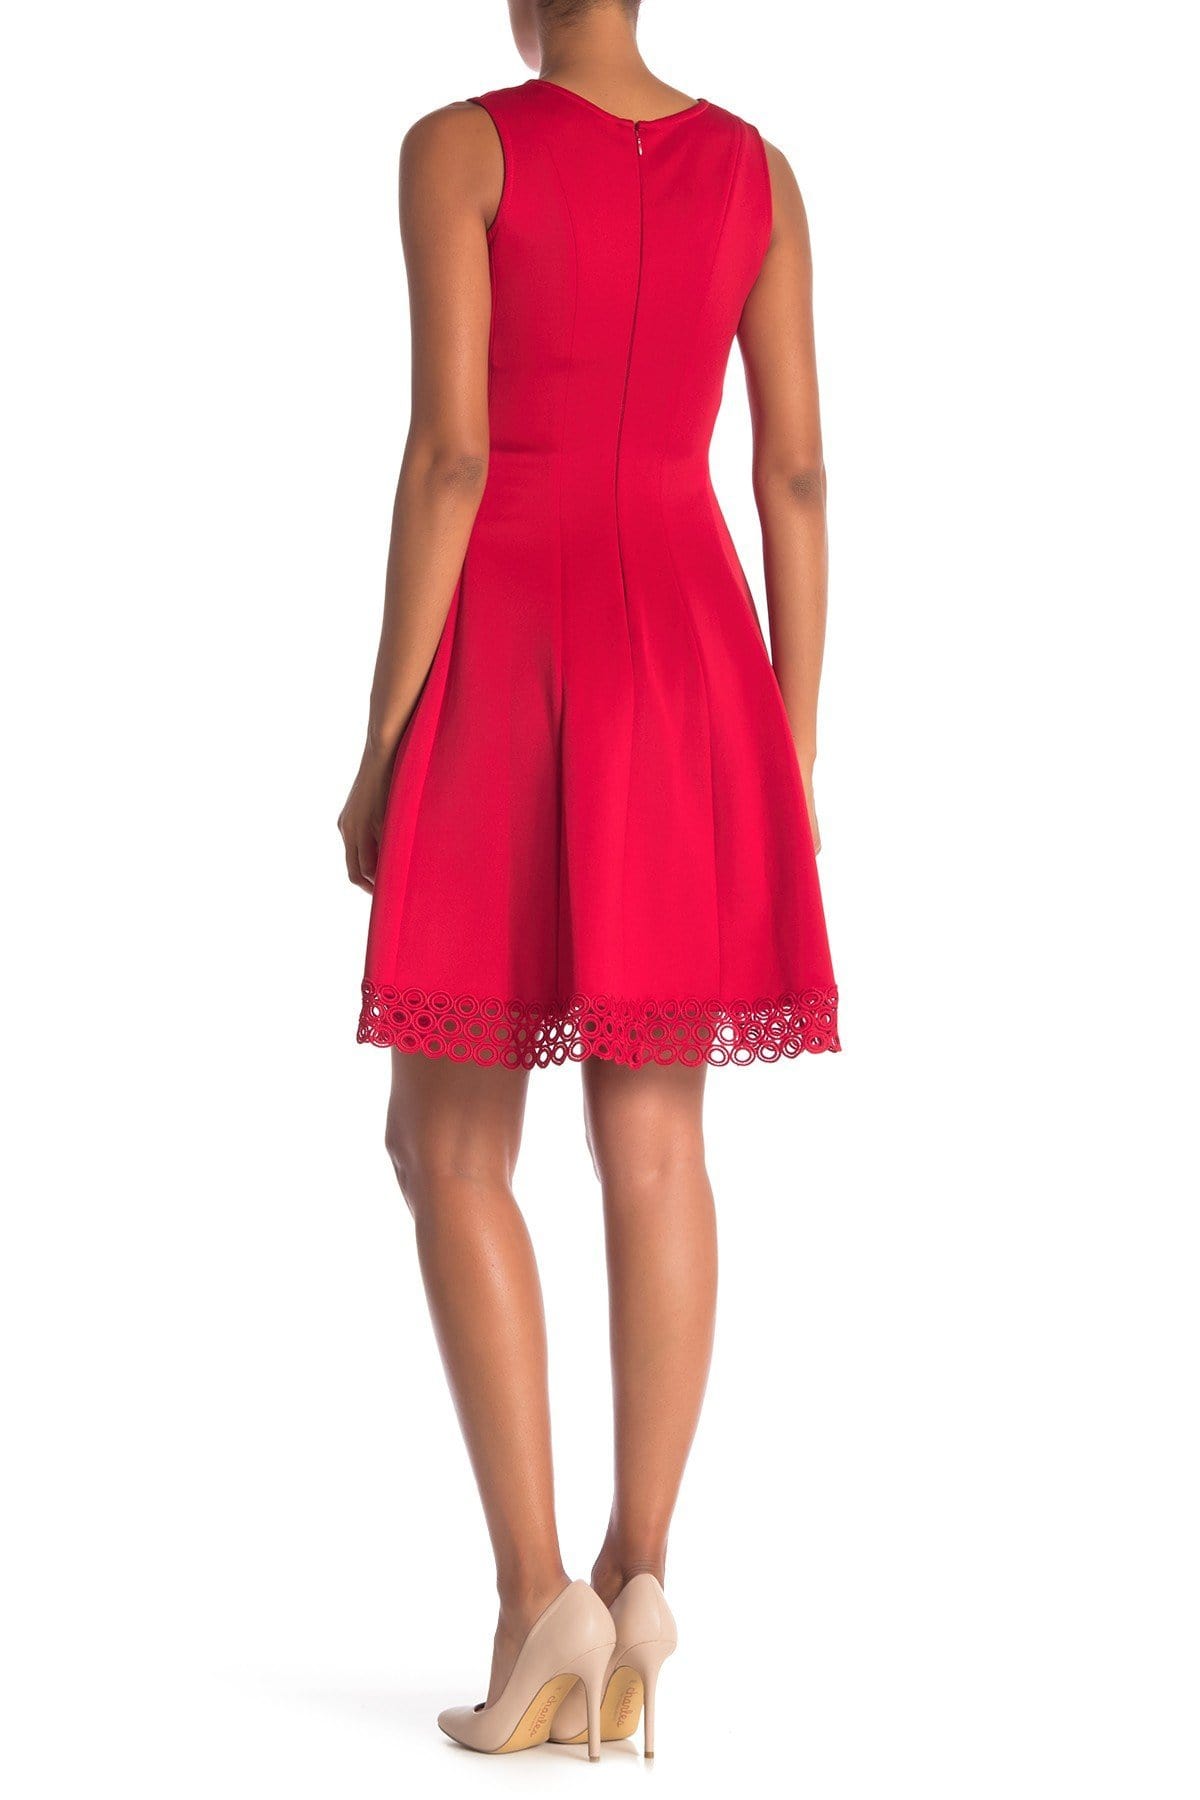 Donna Ricco - DR50487 V Neck Sleeveless Cocktail Dress with Lace Hem In Red